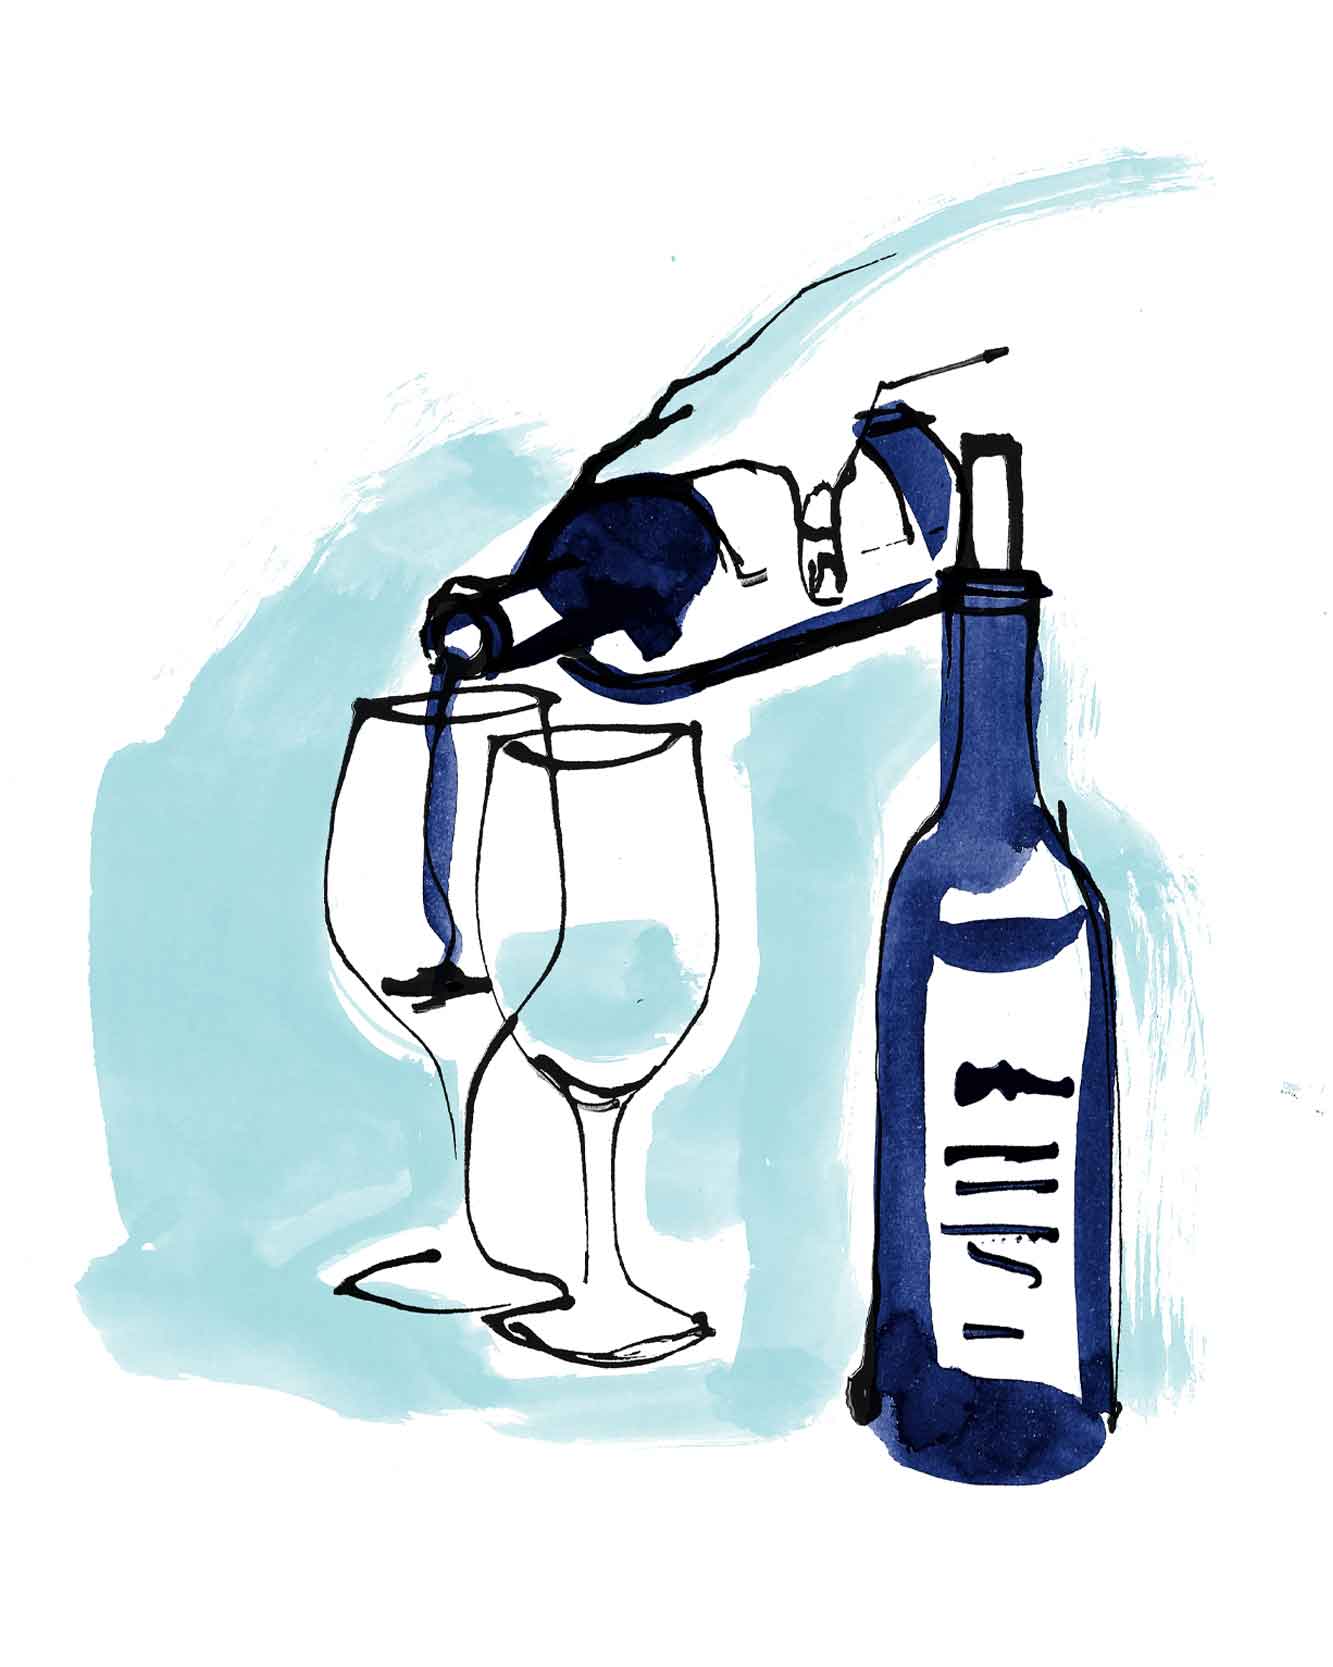 A watercolour and ink illustration of a hand pouring wine into a wine glass. As part of a culinary inspired cruise illustration.<br />
Simple line drawing with a wash of colour. Loose energetic line with an energy to the illustration. As part of a series of travel illustrations.